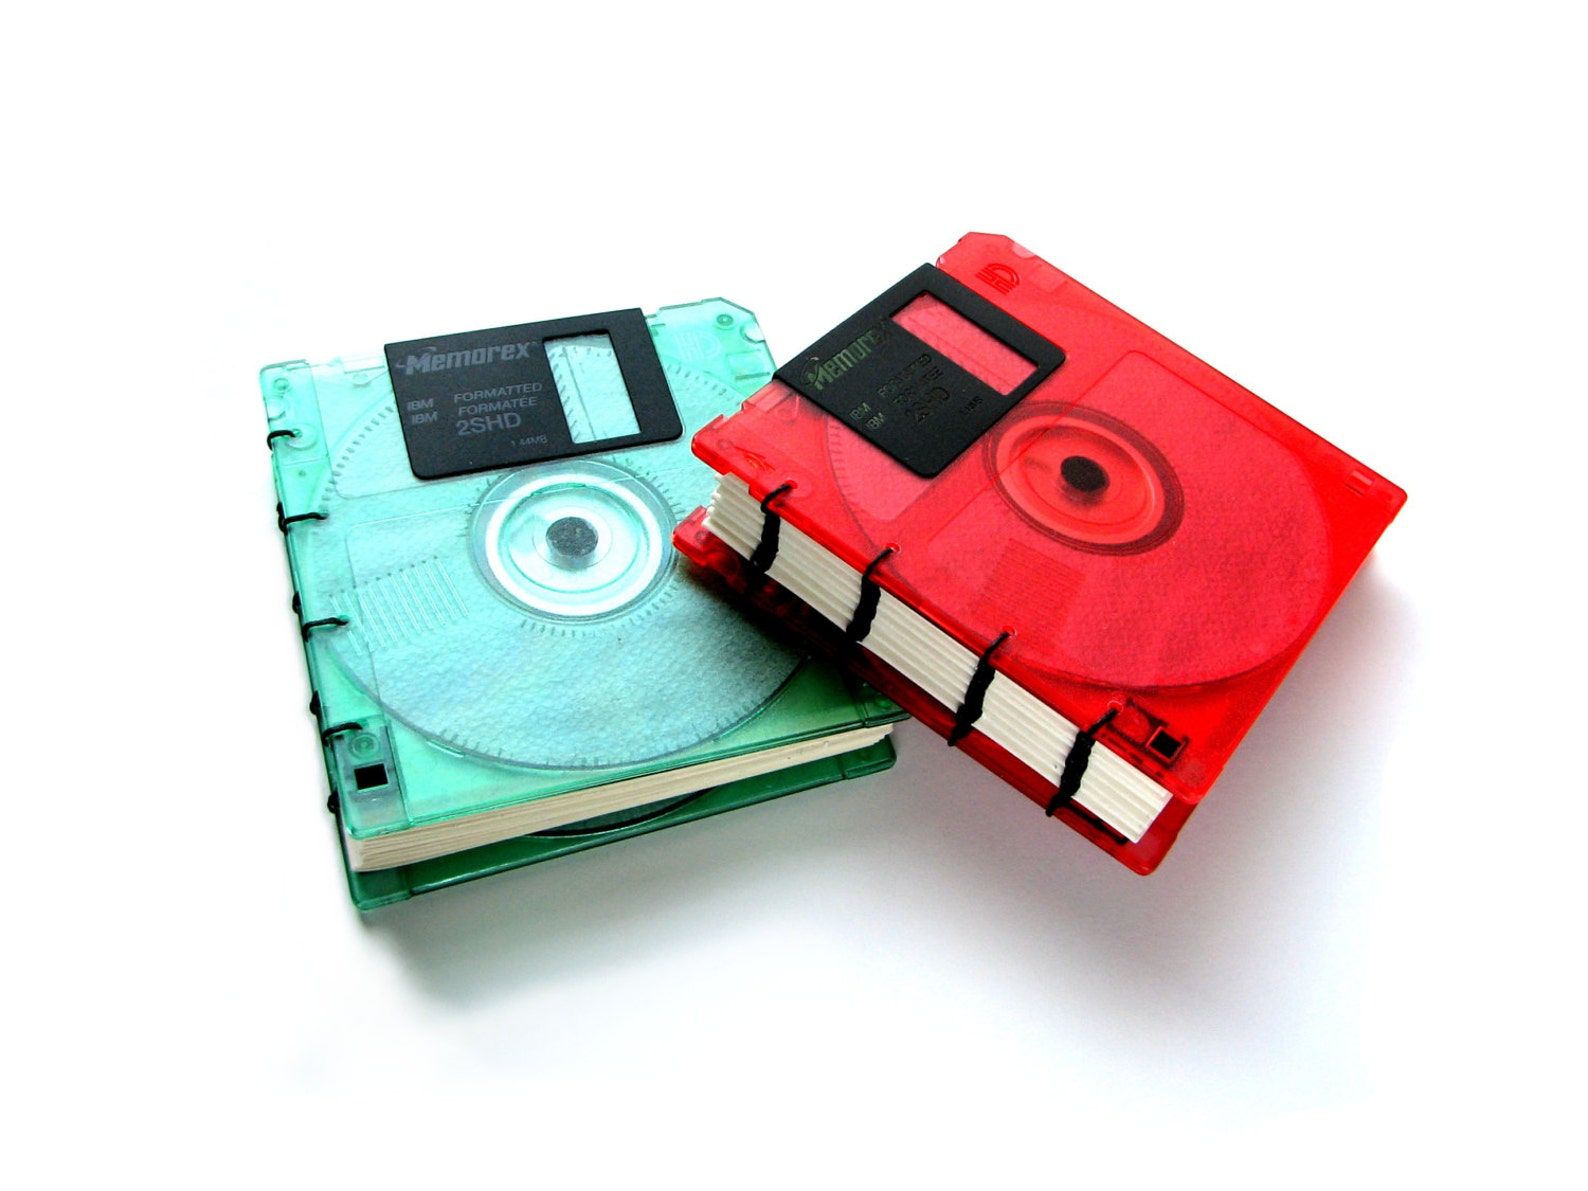 Two small notebooks on a white background. The notebook on the left is made from a green floppy disk and the one on the right is red. 